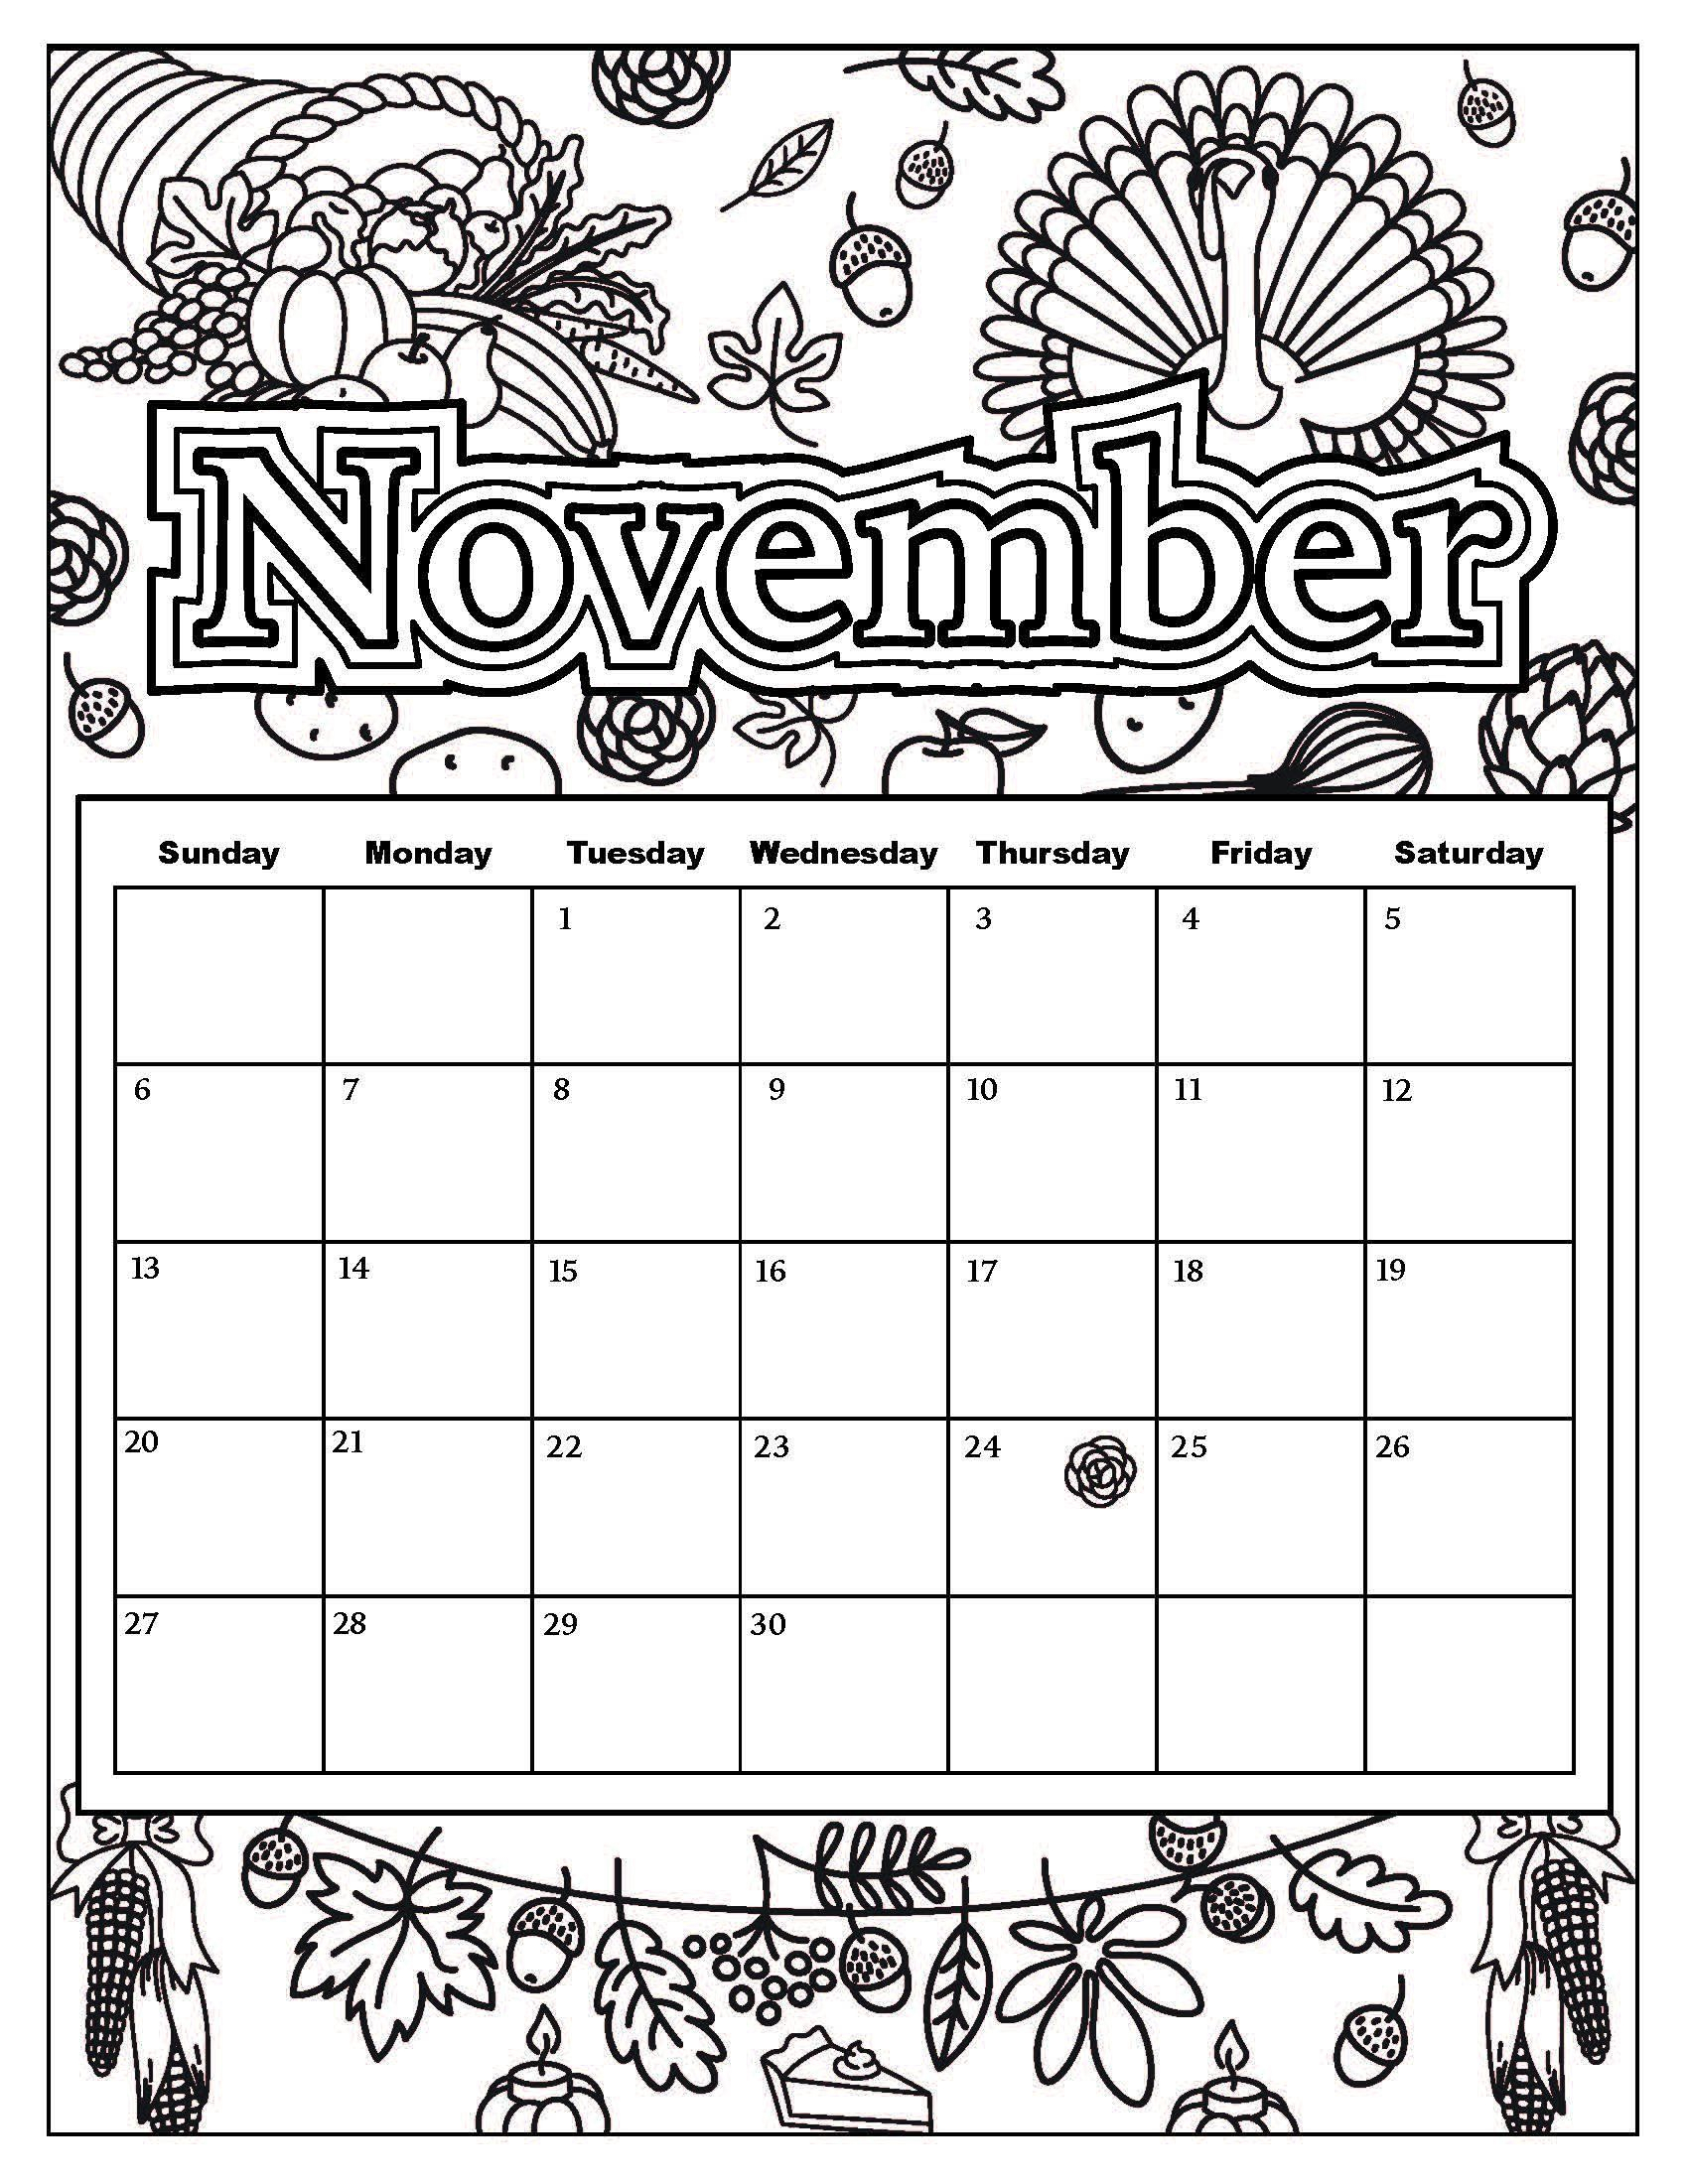 Free Download: Coloring Pages From Popular Adult Coloring